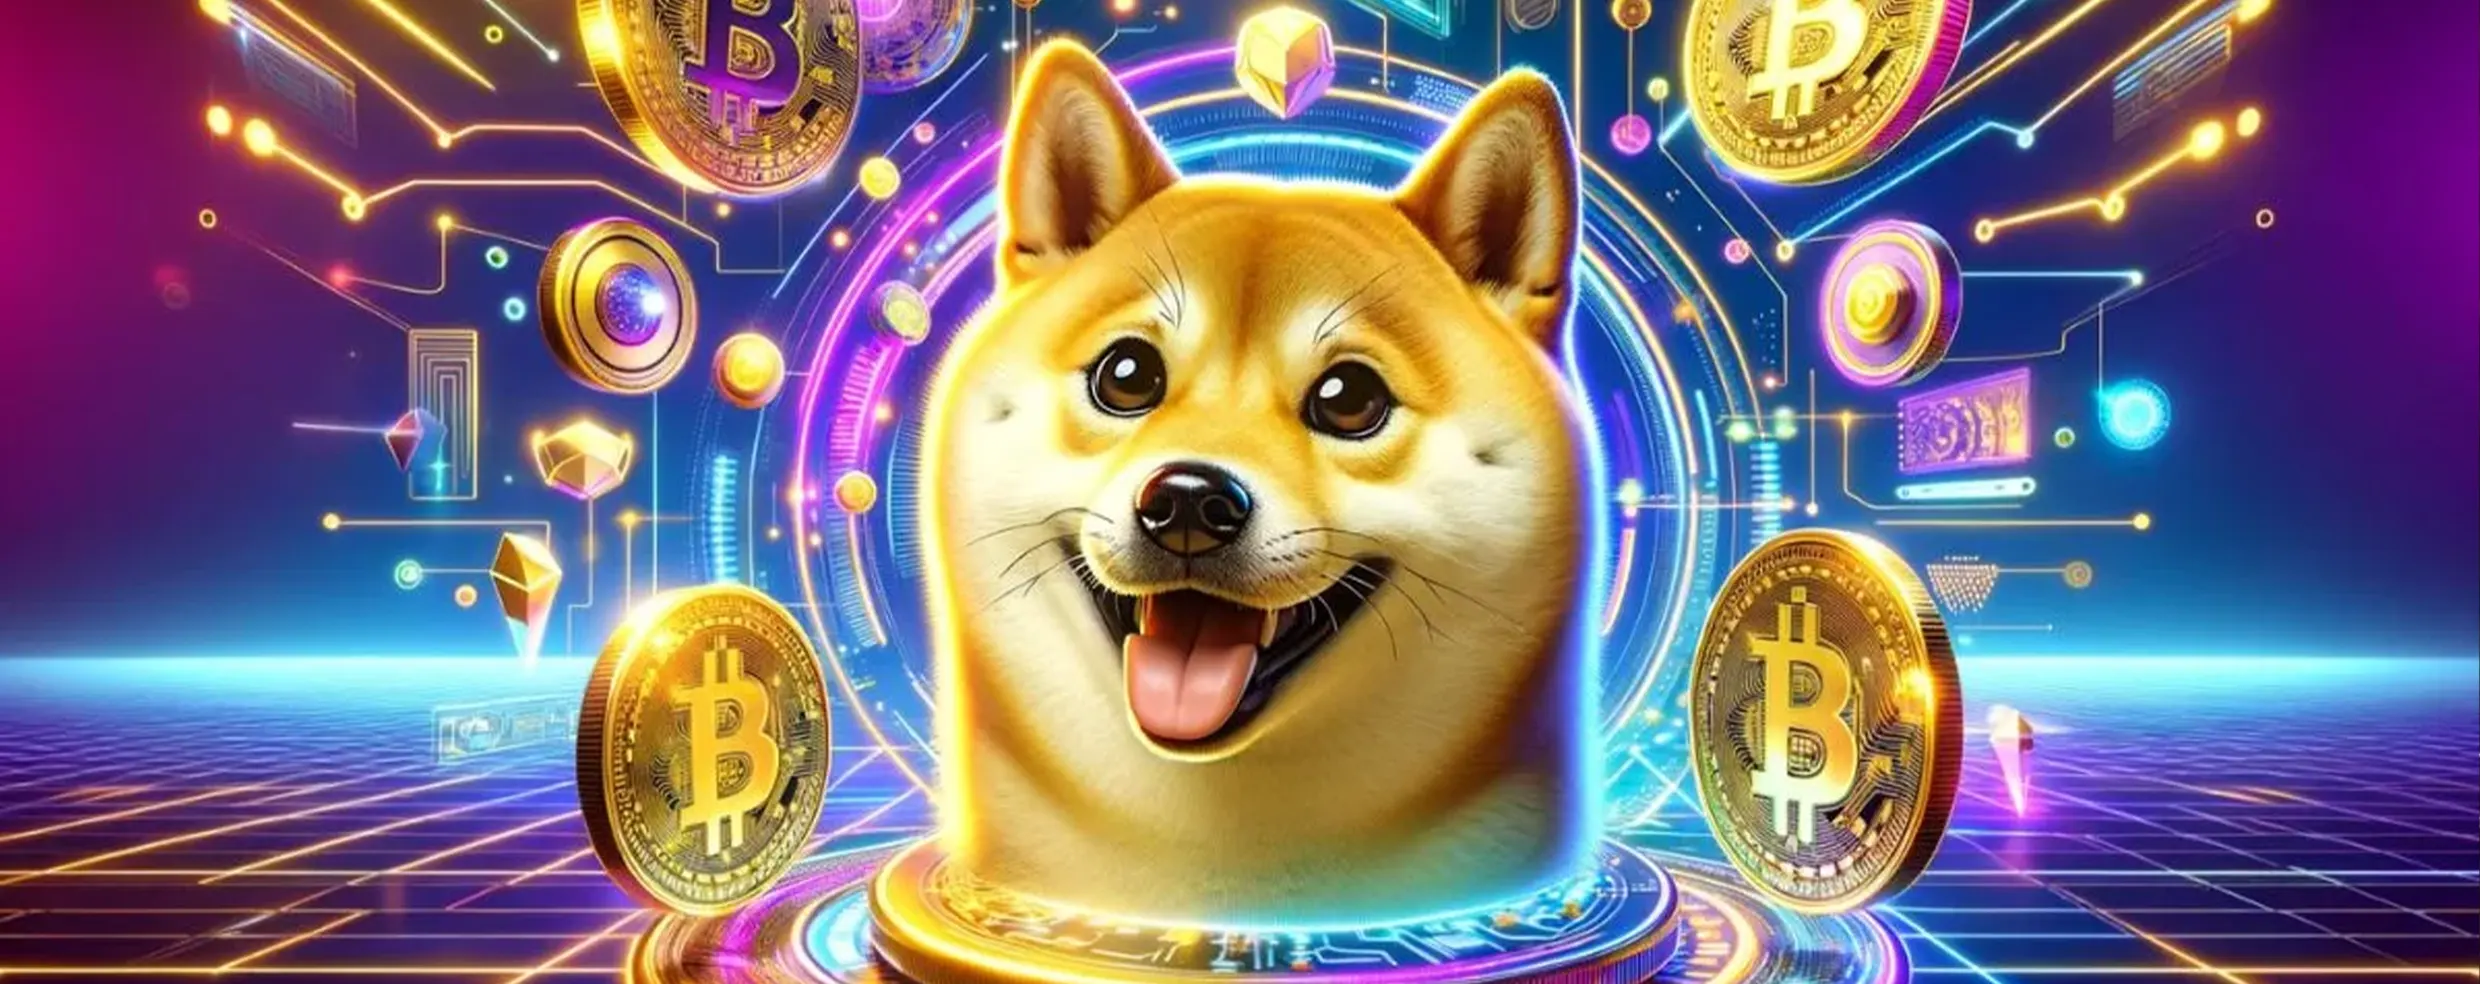 What makes Dogecoin valuable